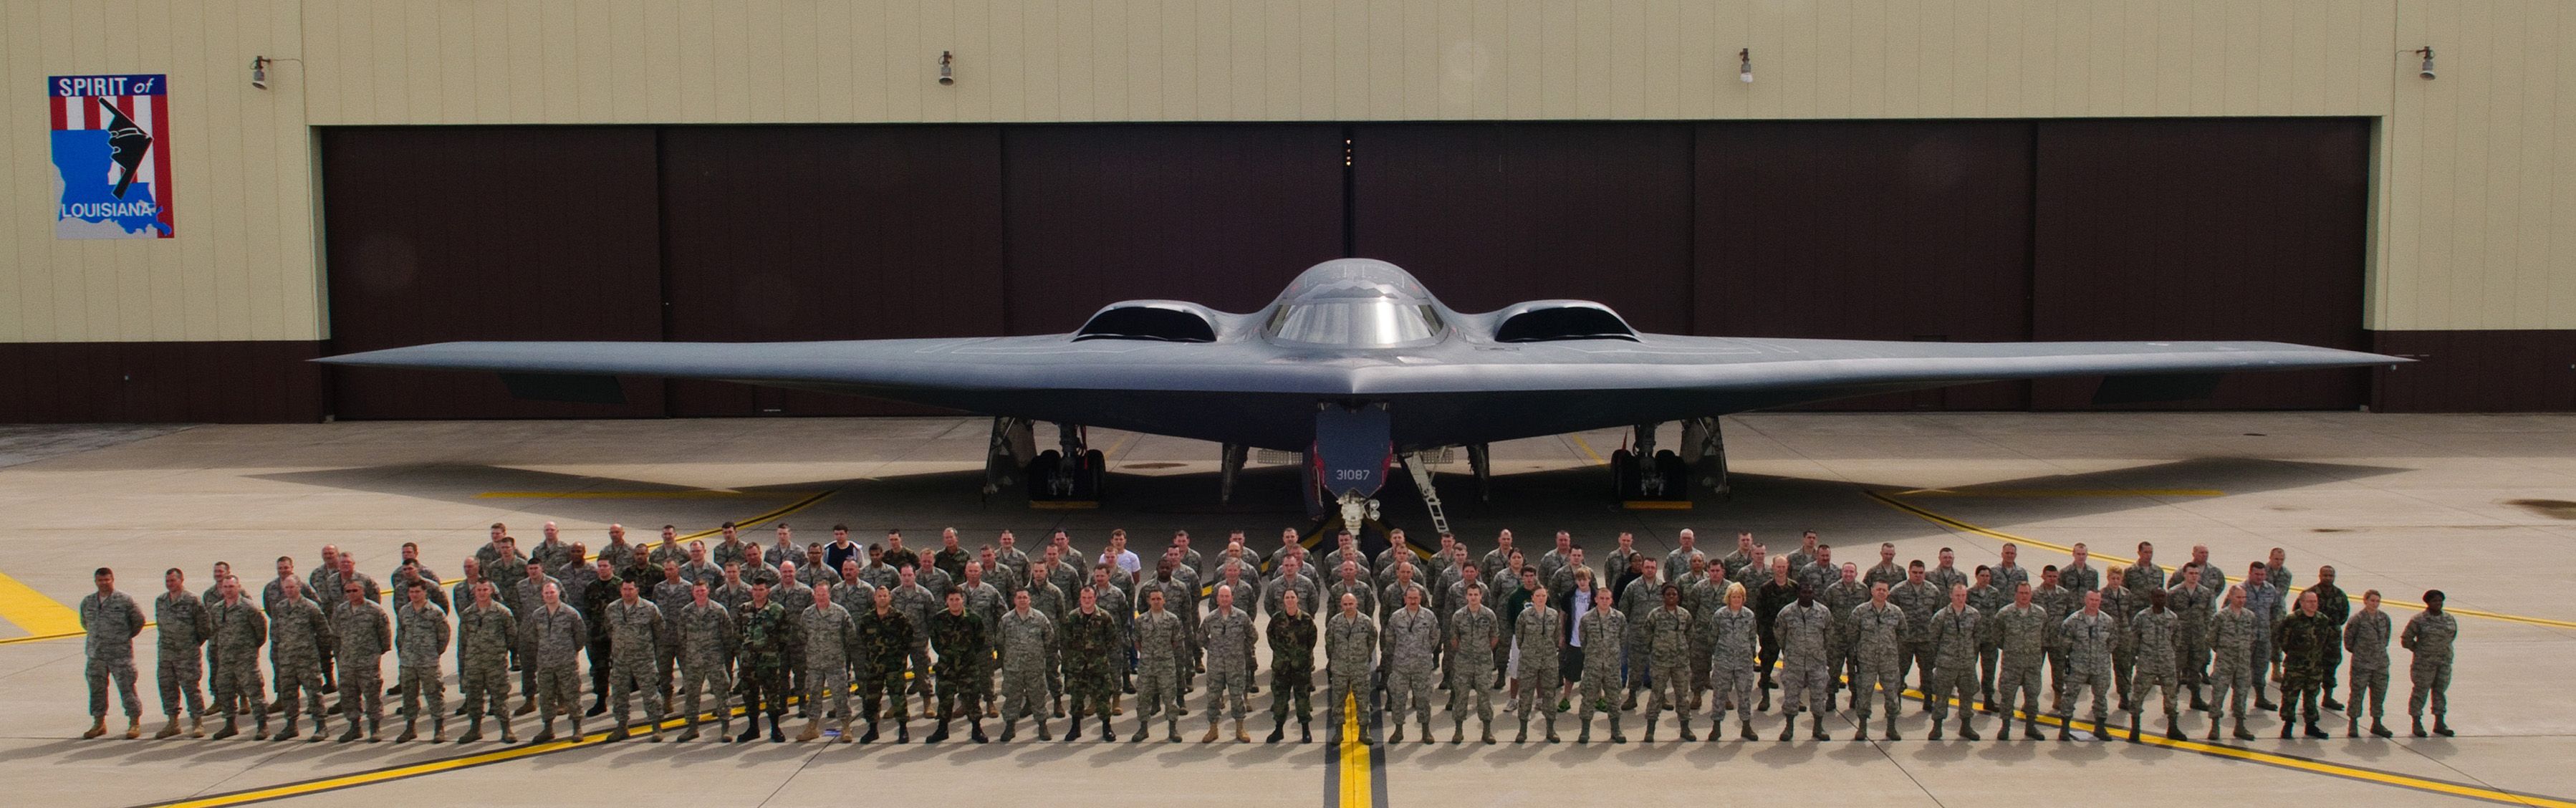 The_131st_Bomb_Wing